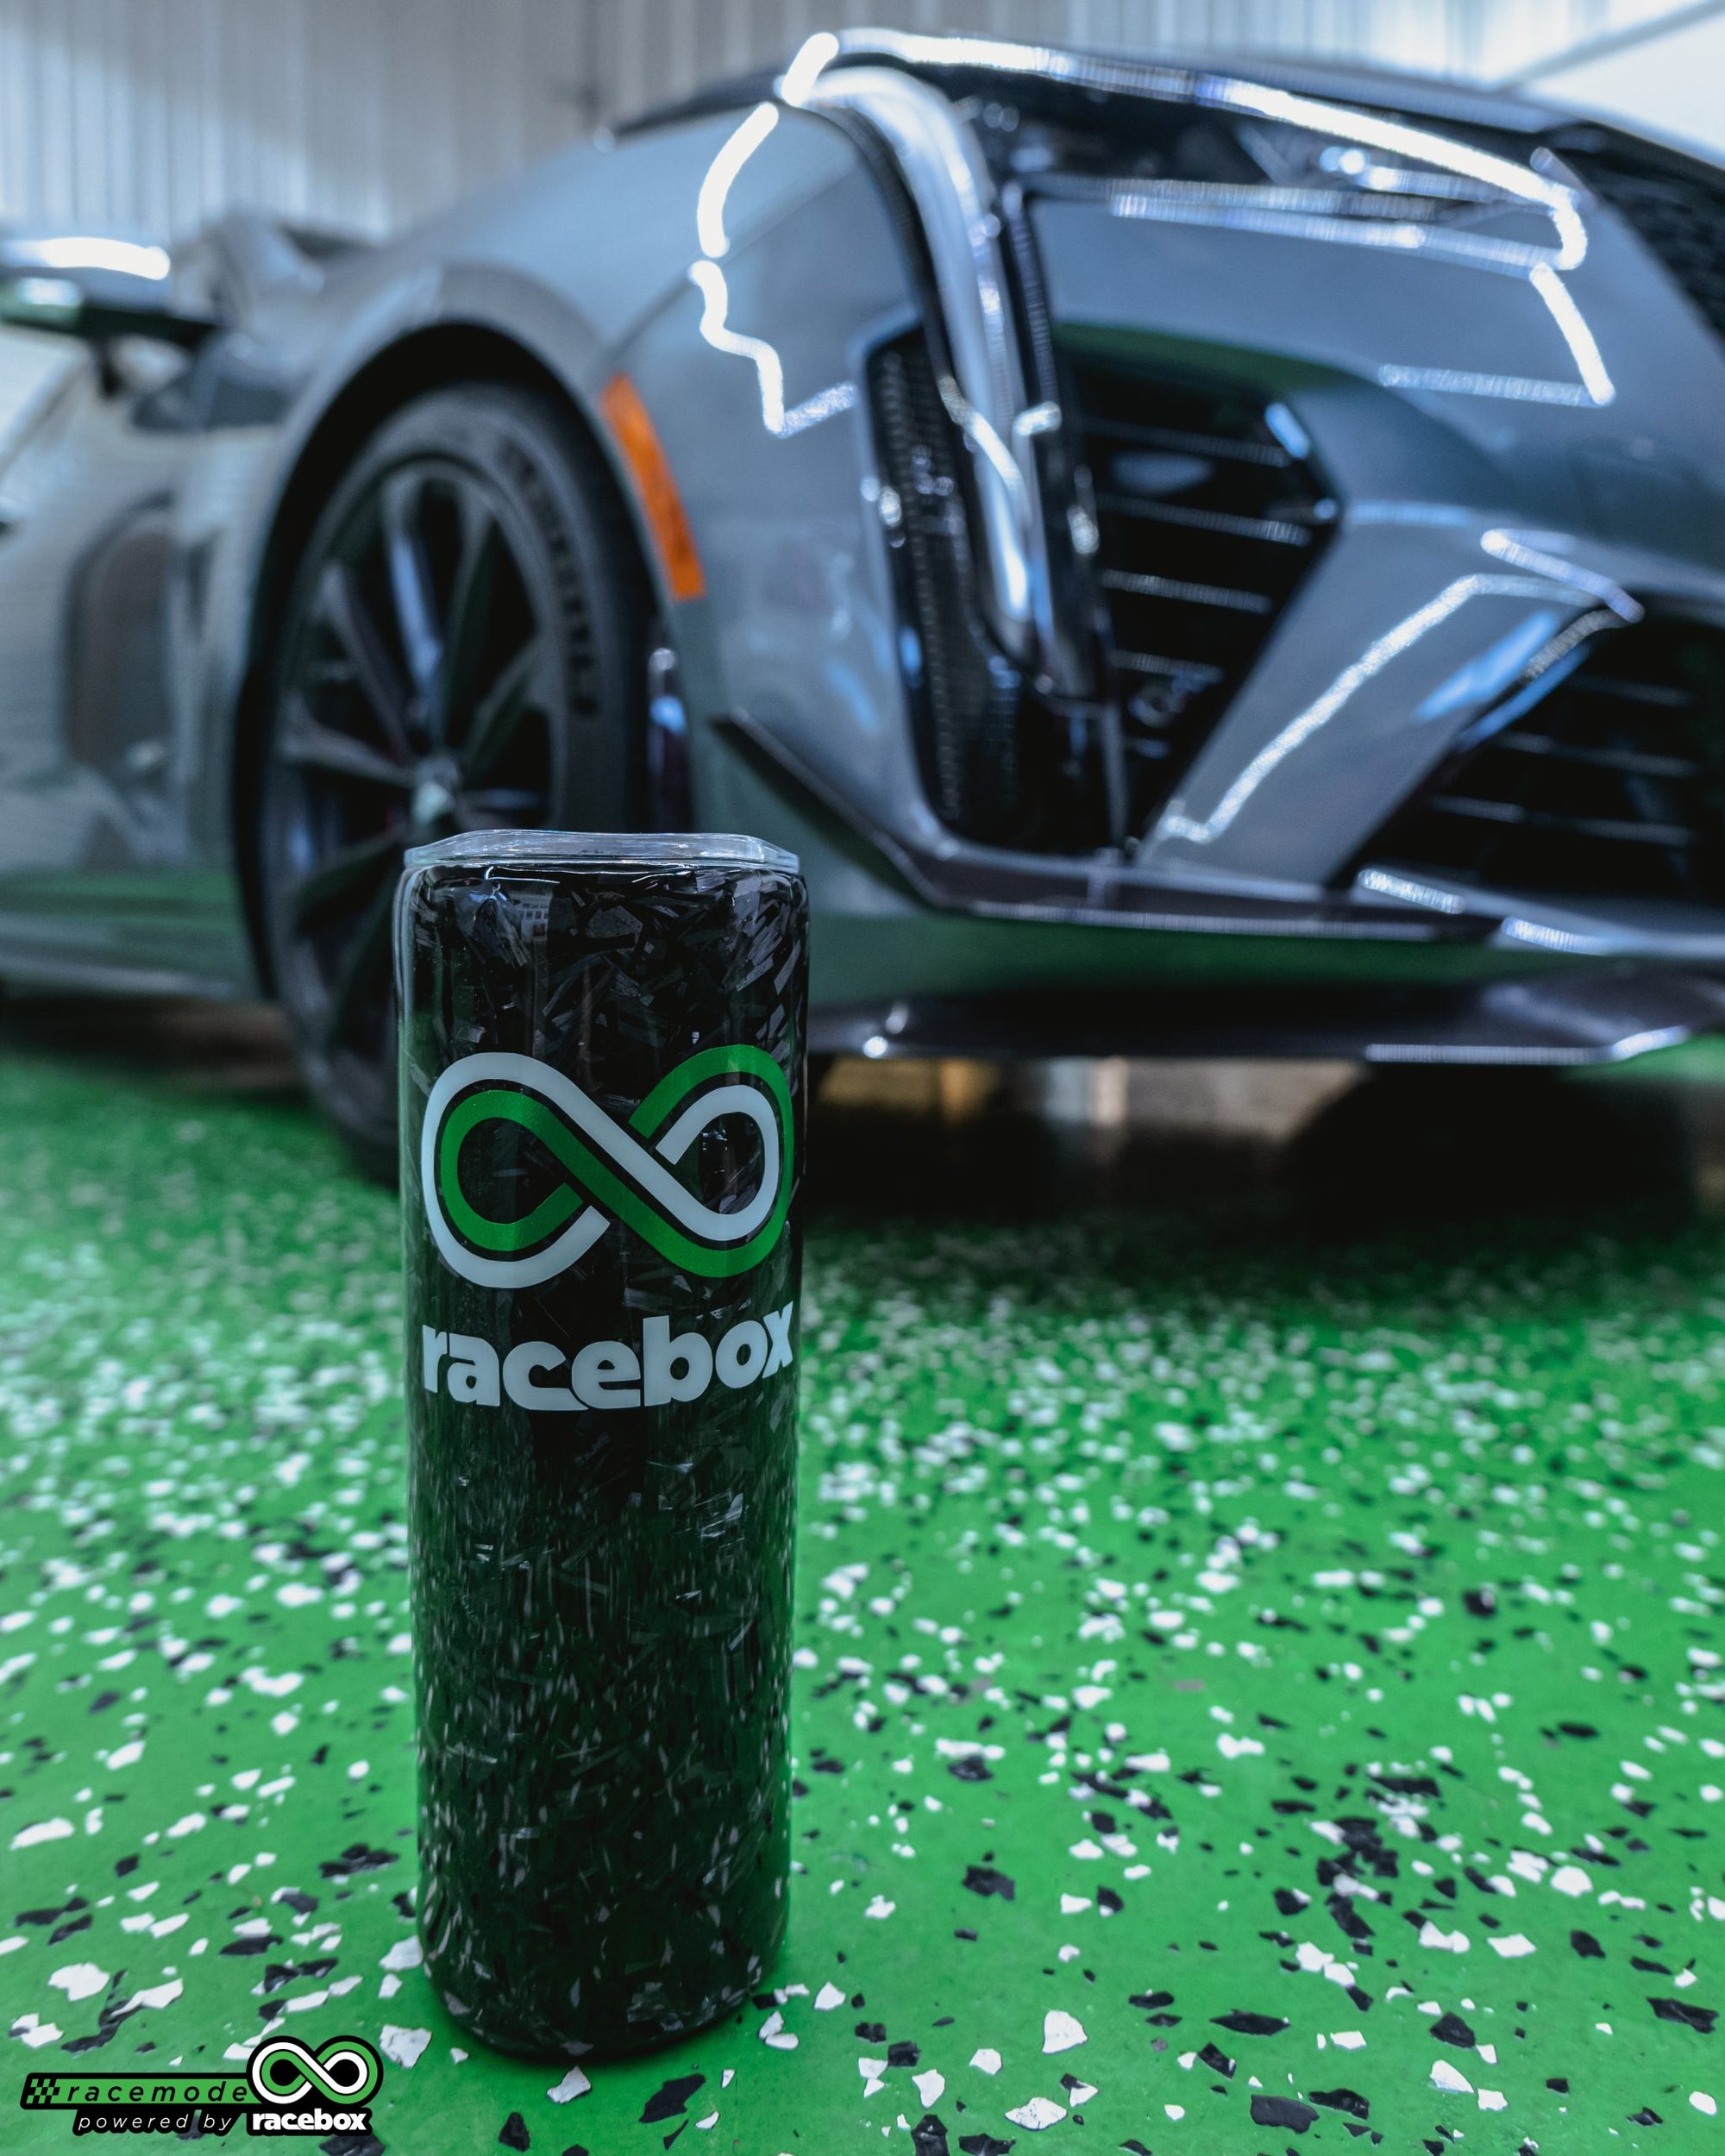 Racebox Carbon Insulated Cup